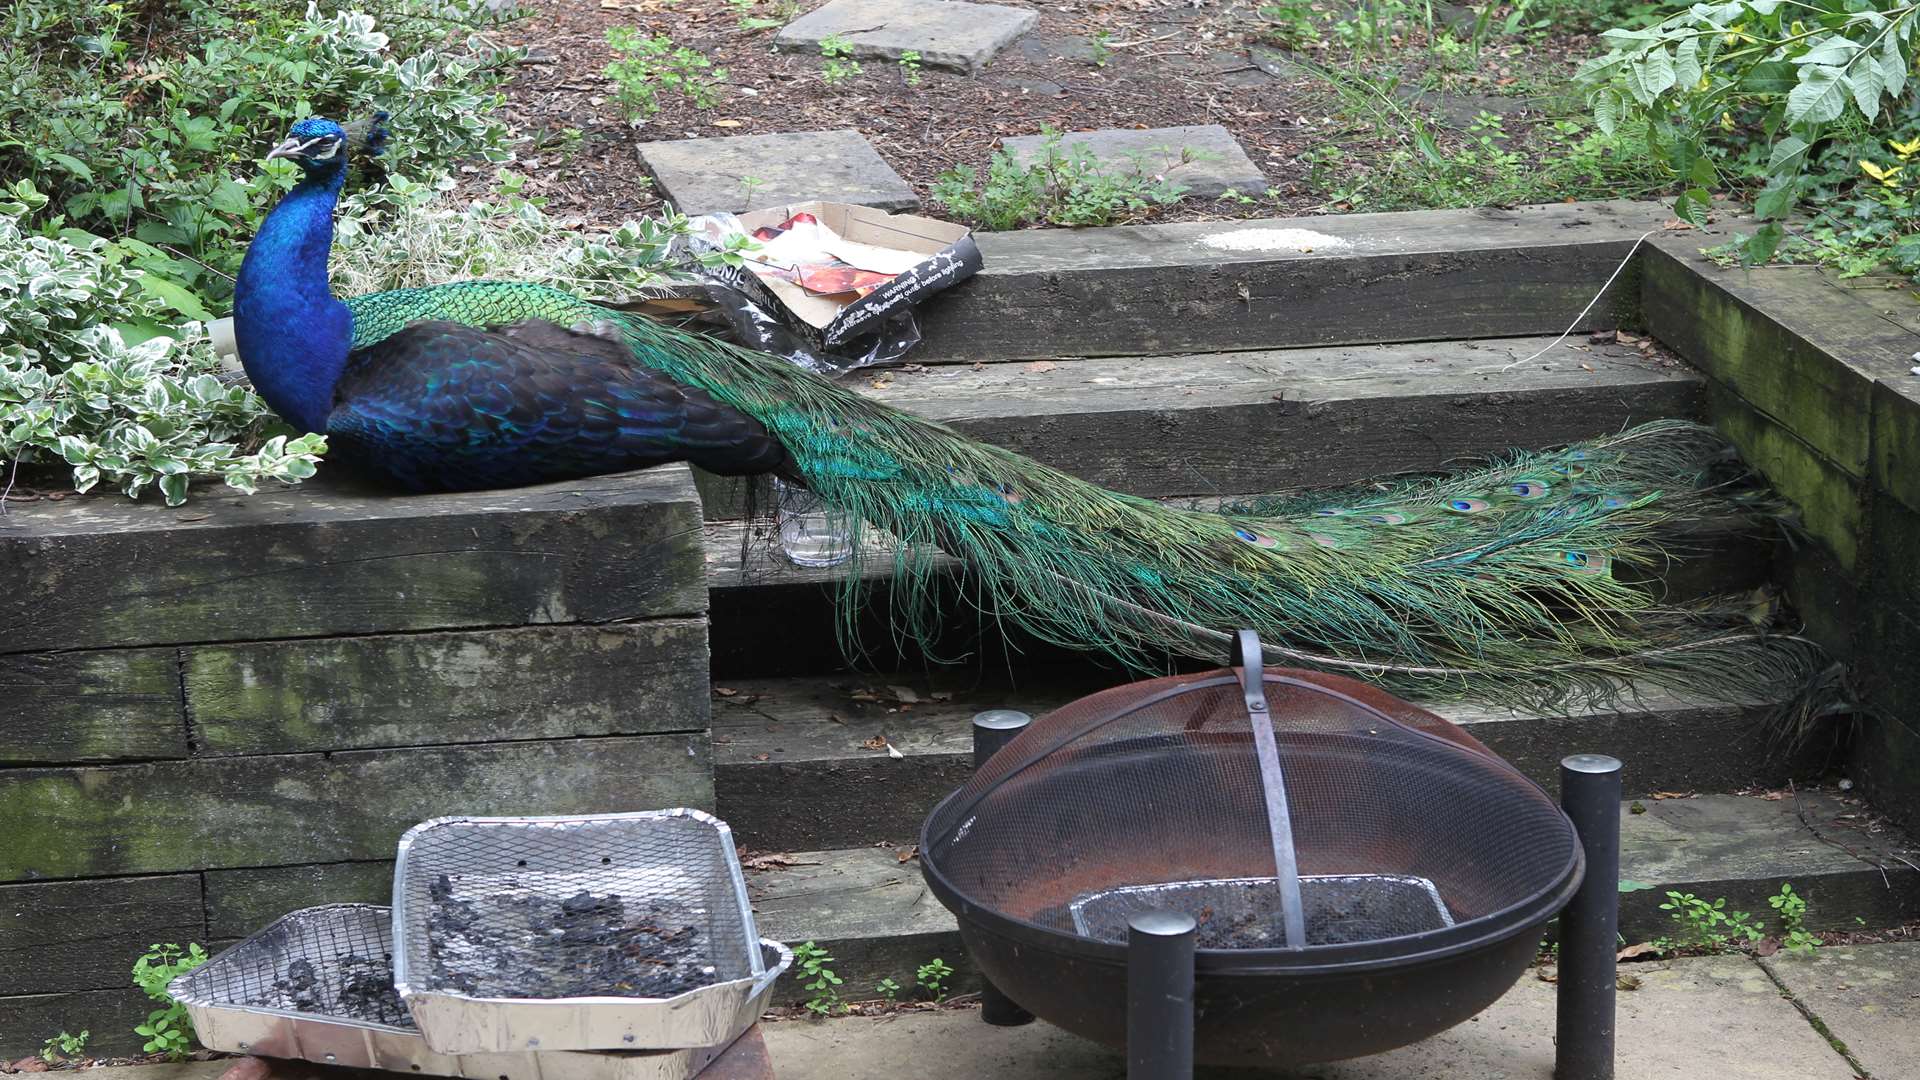 Percy the peacock in a garden yesterday. Picture: John Westhrop